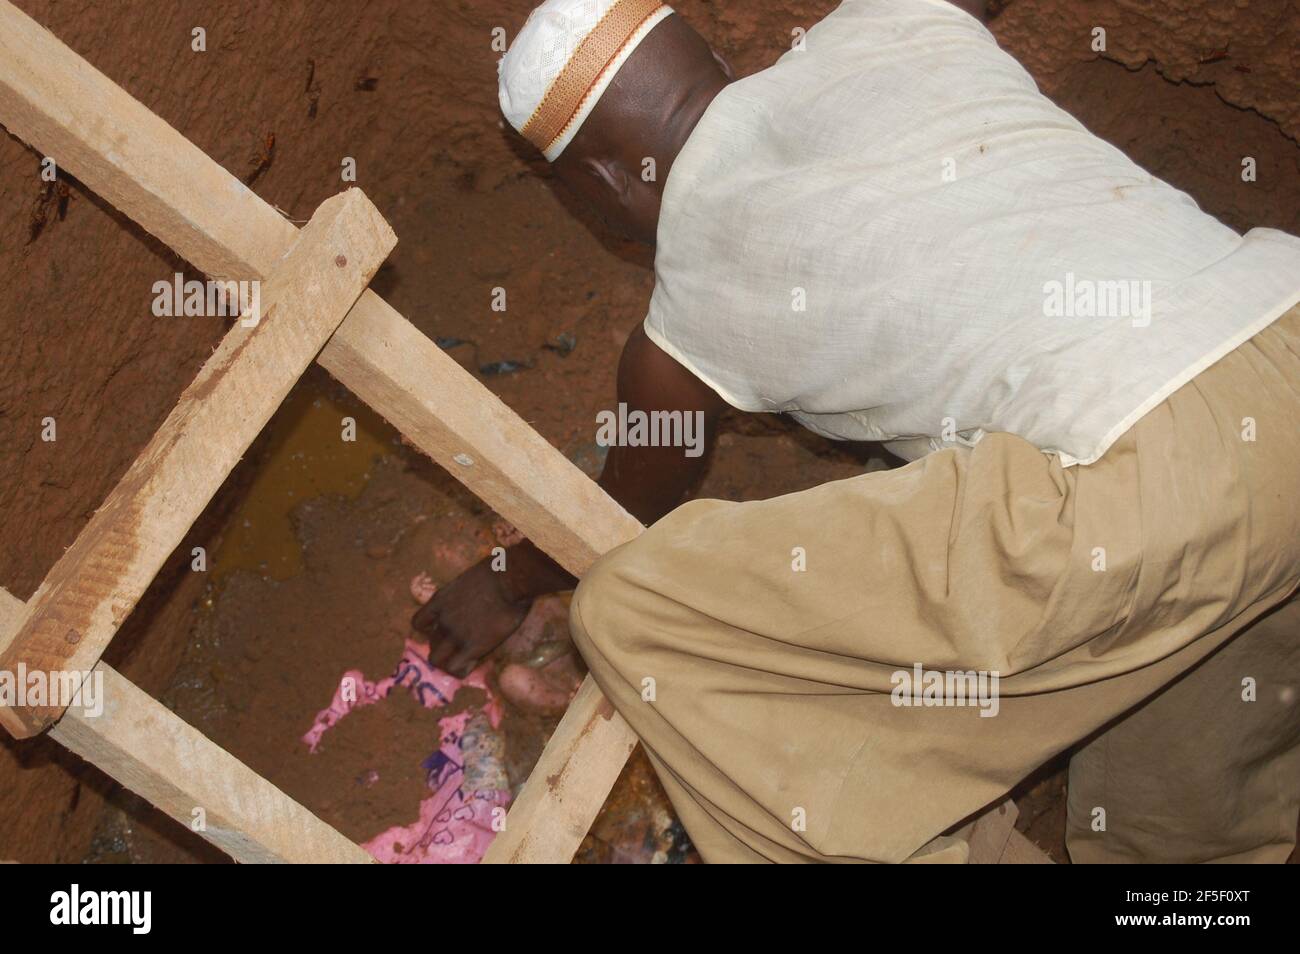 2. Abandoned Baby: A man rescuing the newborn baby from the pit toilet in Lagos Nigeria. Stock Photo